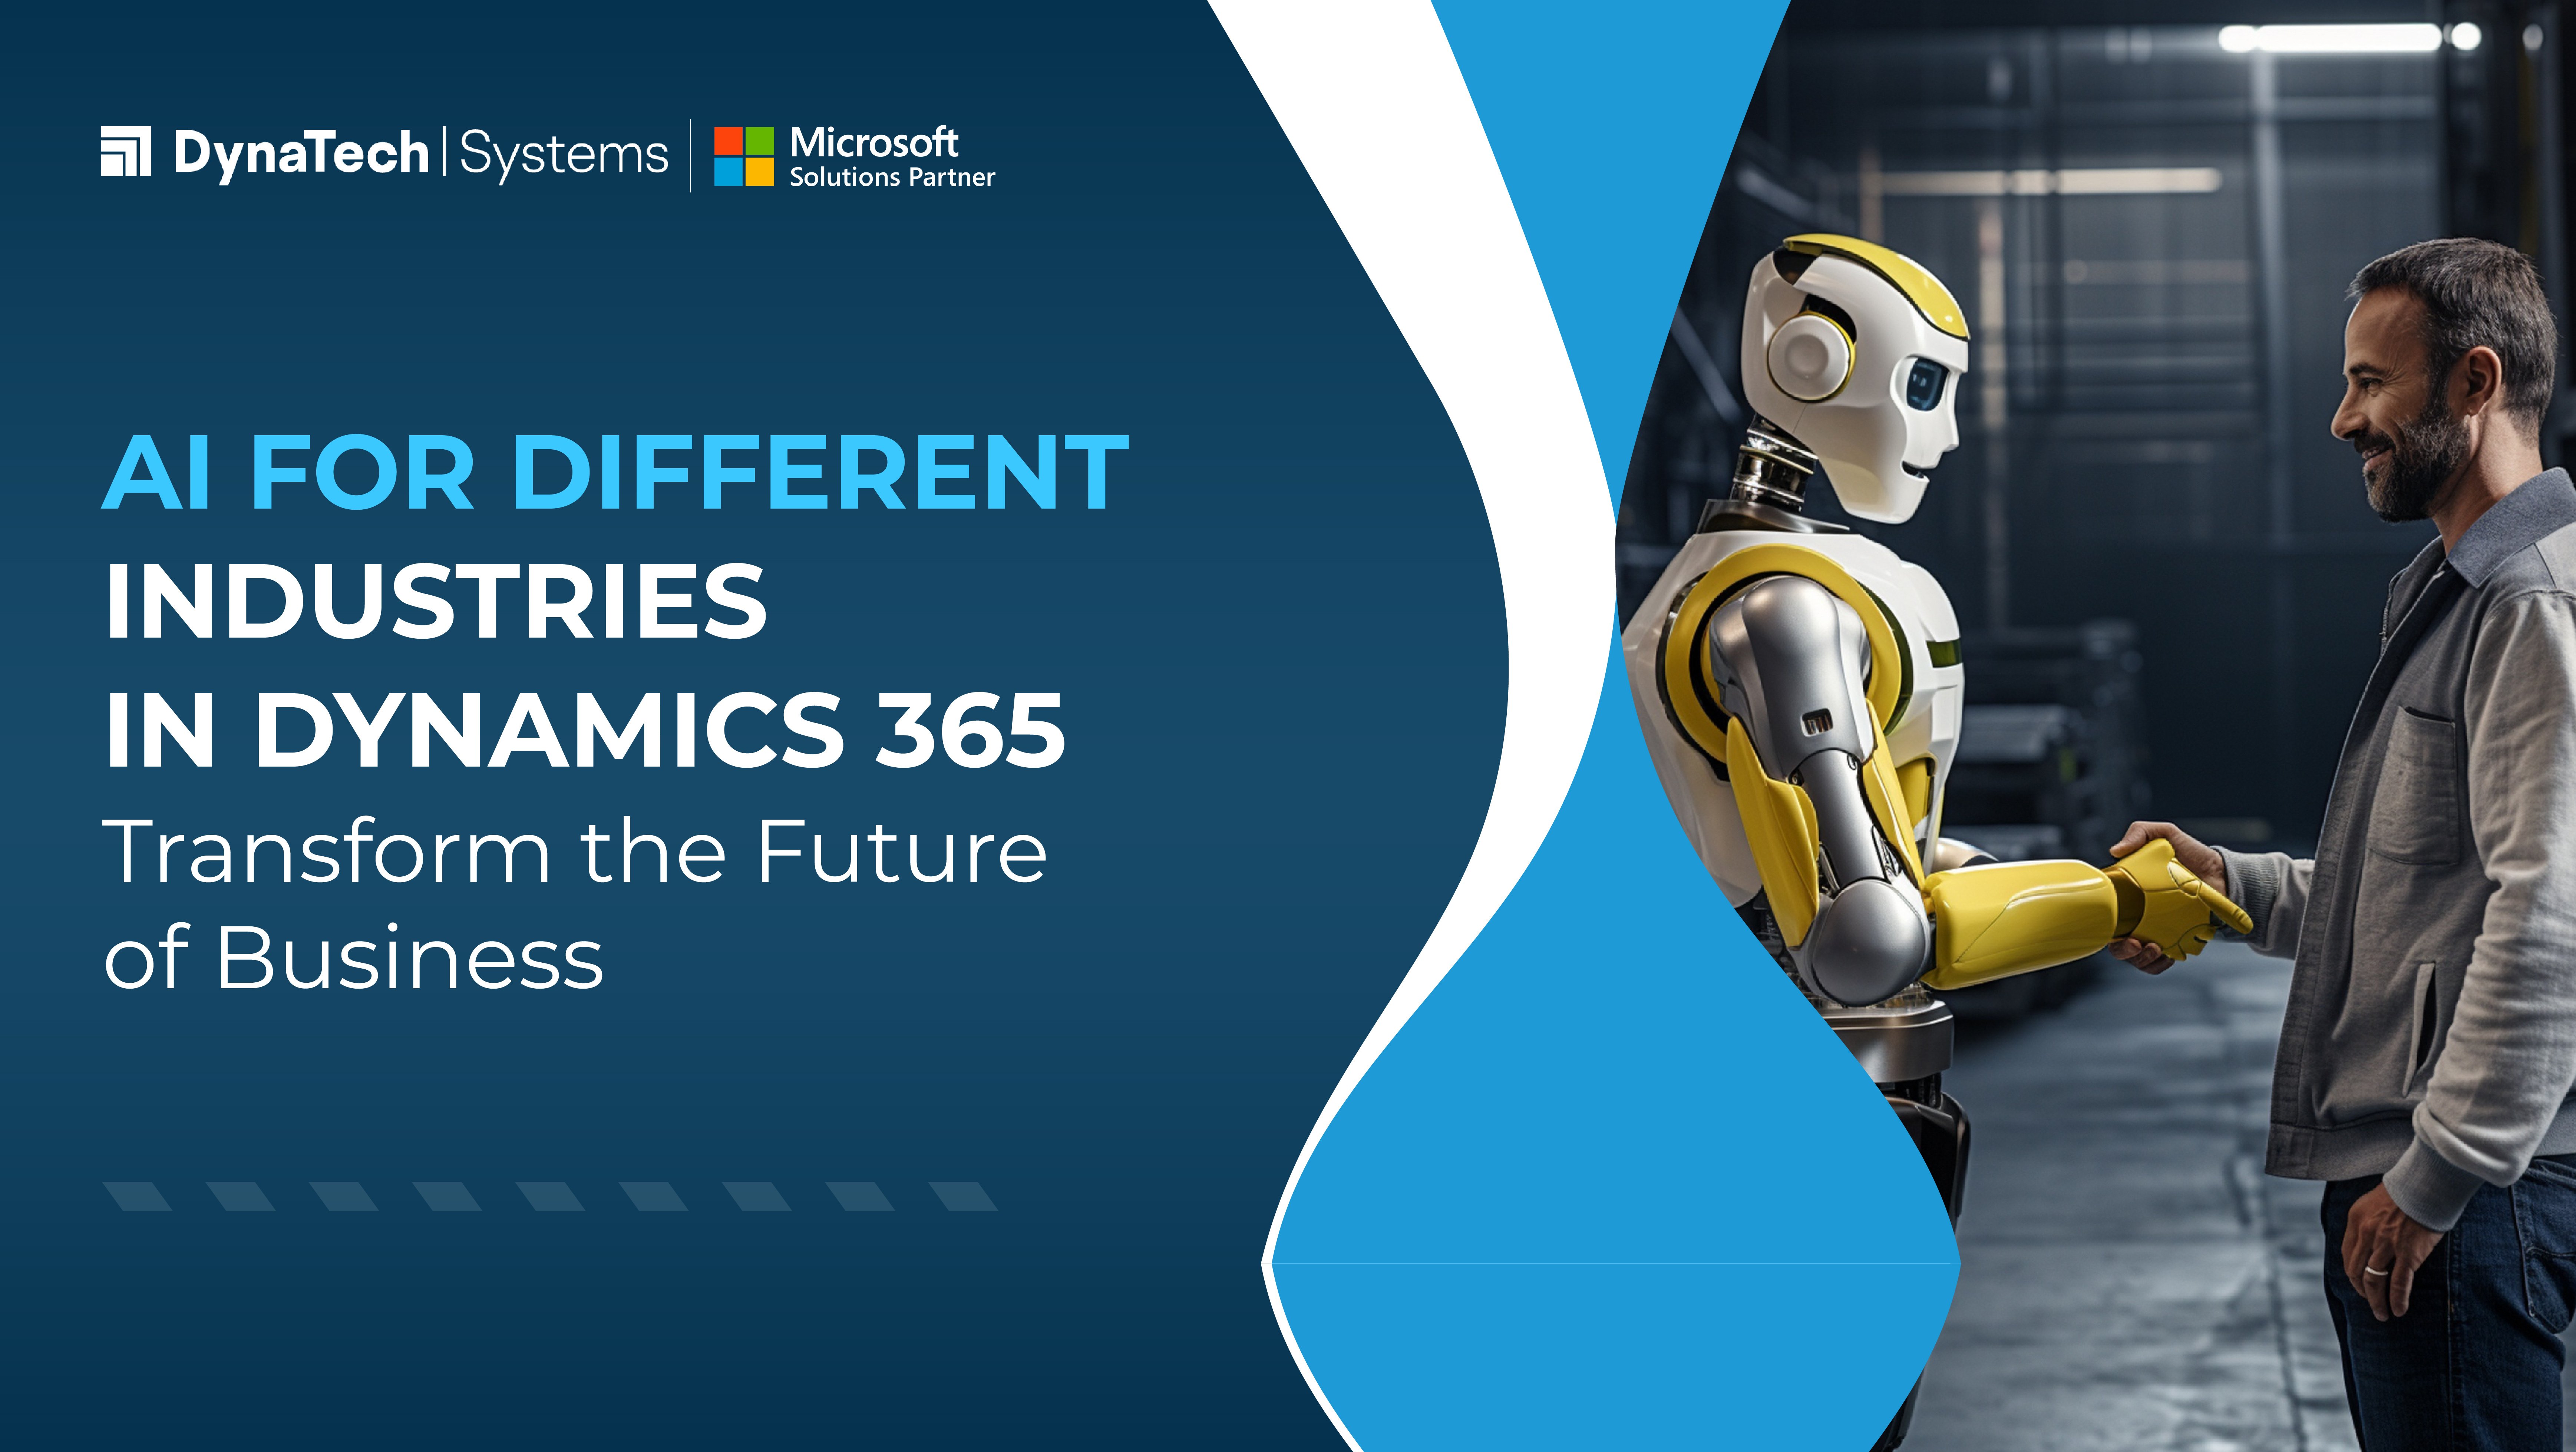 AI for Different Industries in Dynamics 365: Transform the Future of Business